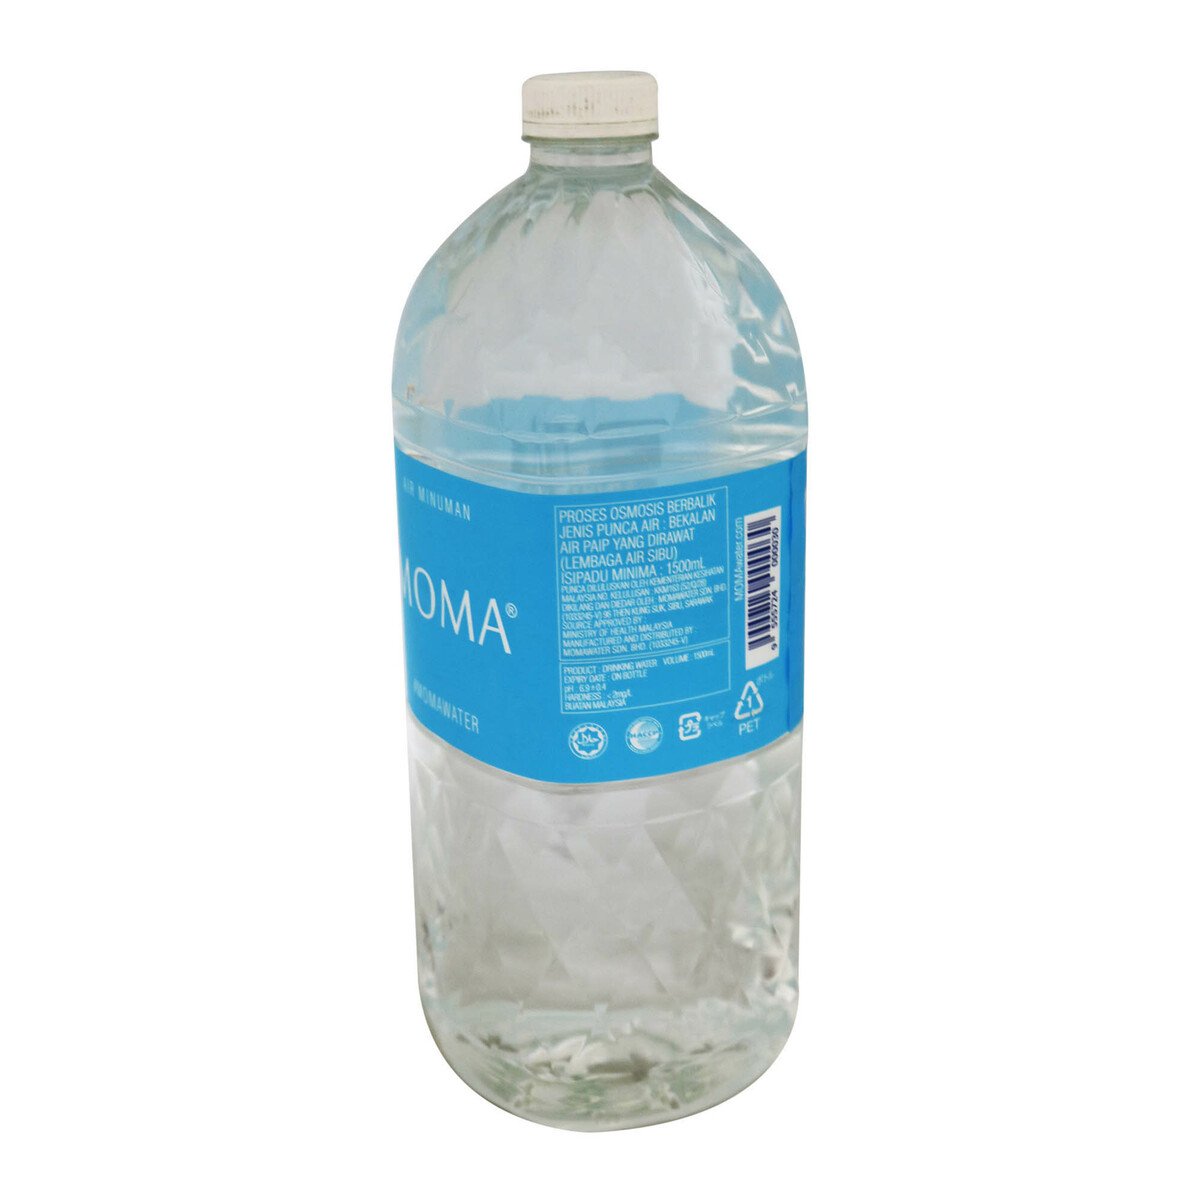 Moma Water 1.5Litre